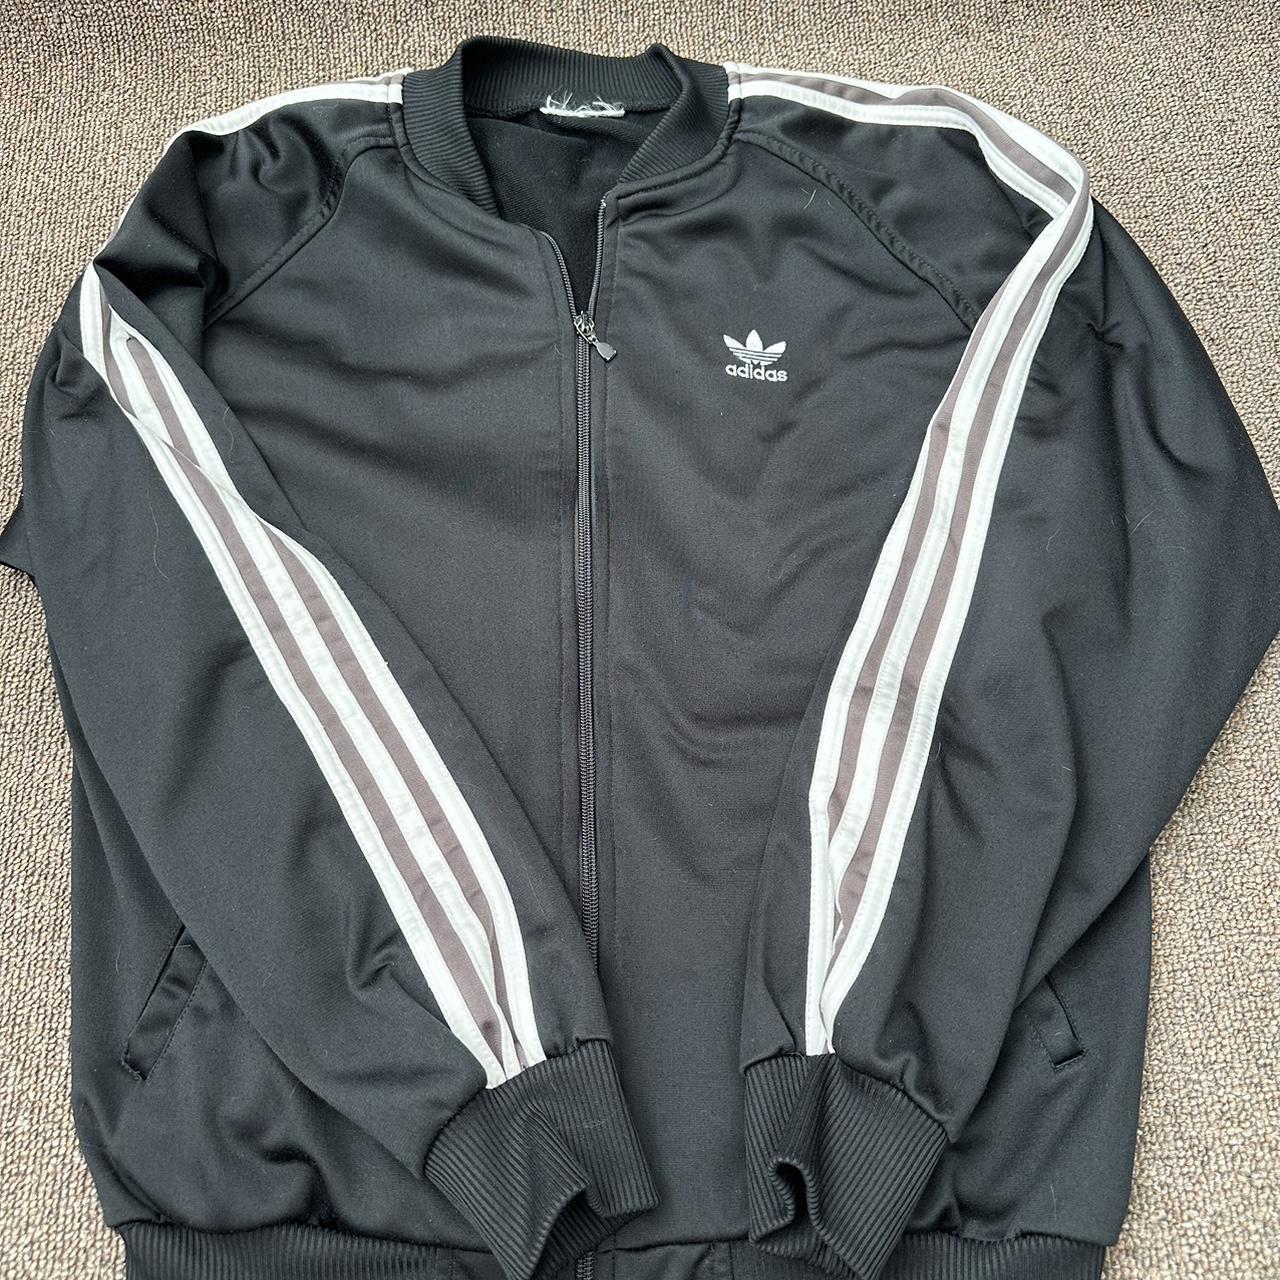 Adidas Jacket Men’s any questions at all do not... - Depop